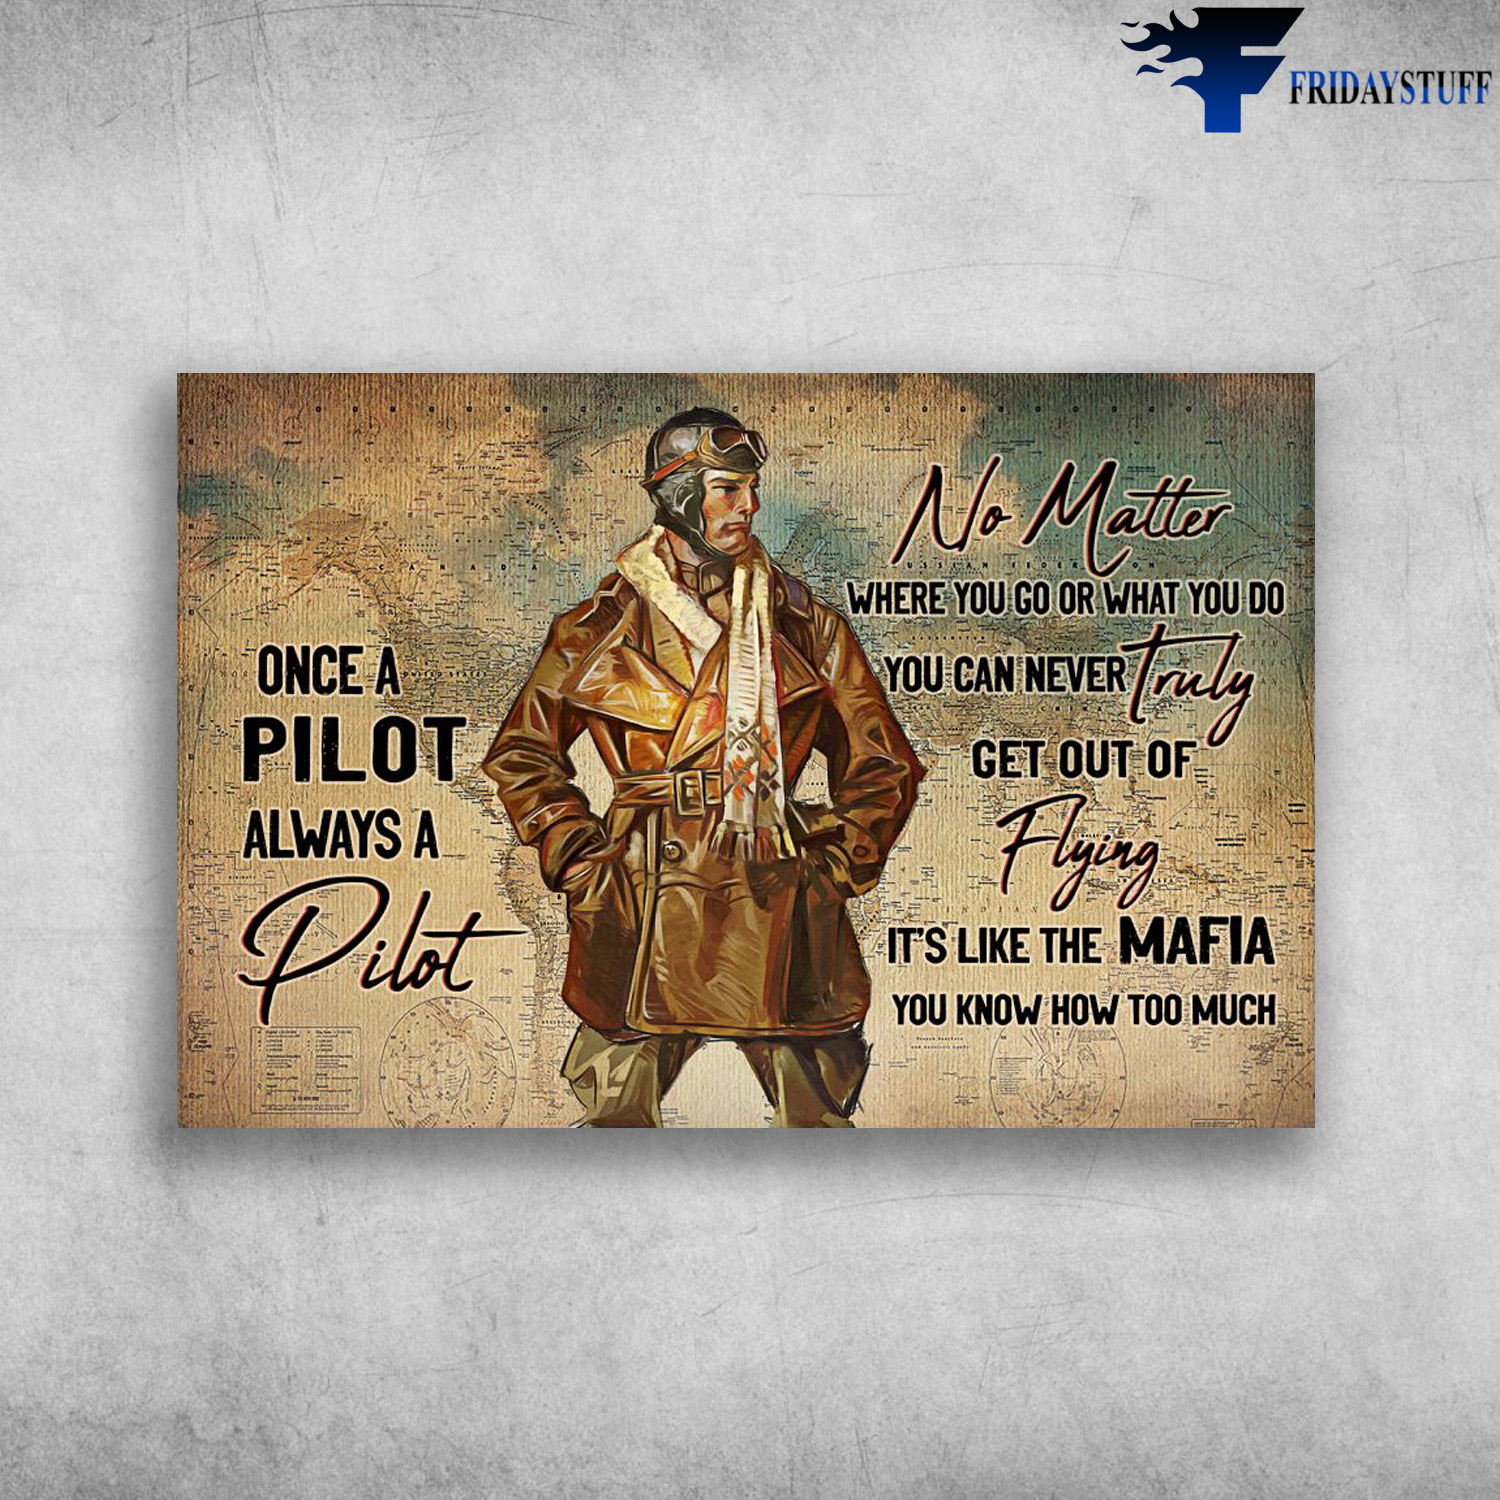 Pilot Man - Once A Pilot, Always A Piot, No Matter Where You Go, Or What You Do, You Can Never Truly, Get Out Of Flying, It's Like The Mafia, You Know How Too Much